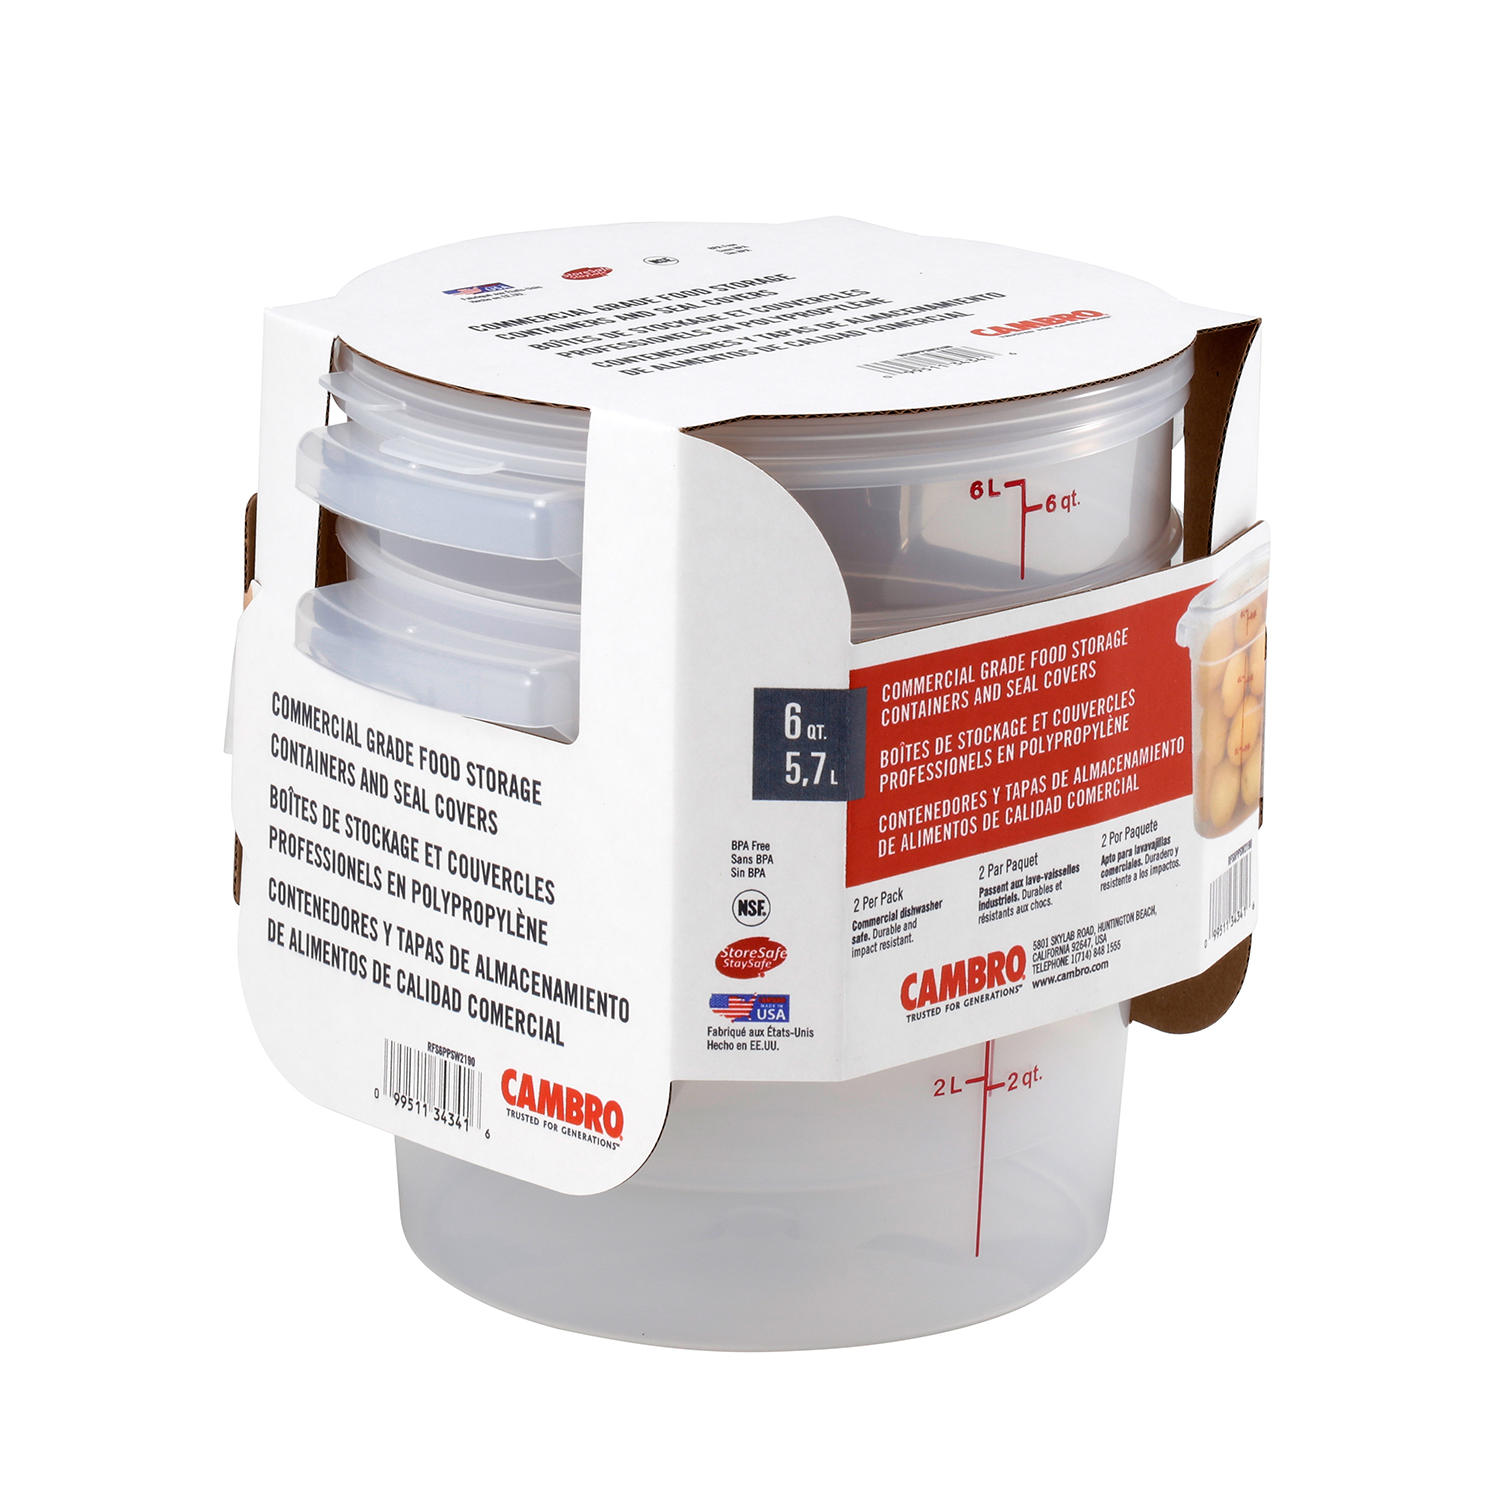 Cambro Round Translucent Container with Lid (6 qt, 2 pk.)